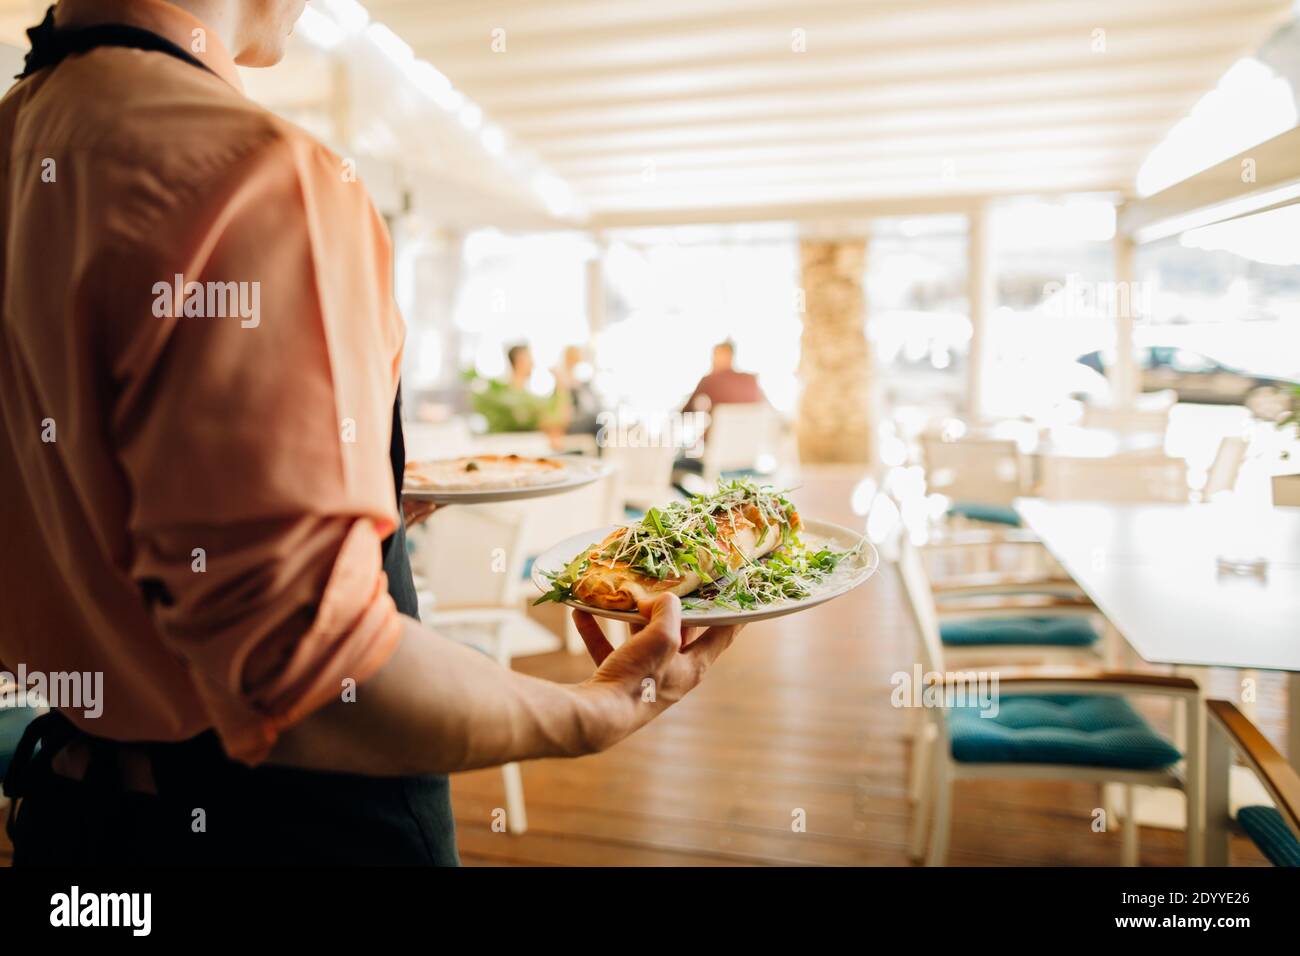 Waiter serving lunch to the distant customer.Empty restaurant due to safety restrictions. Small business working at lower capacity.No customers in the Stock Photo